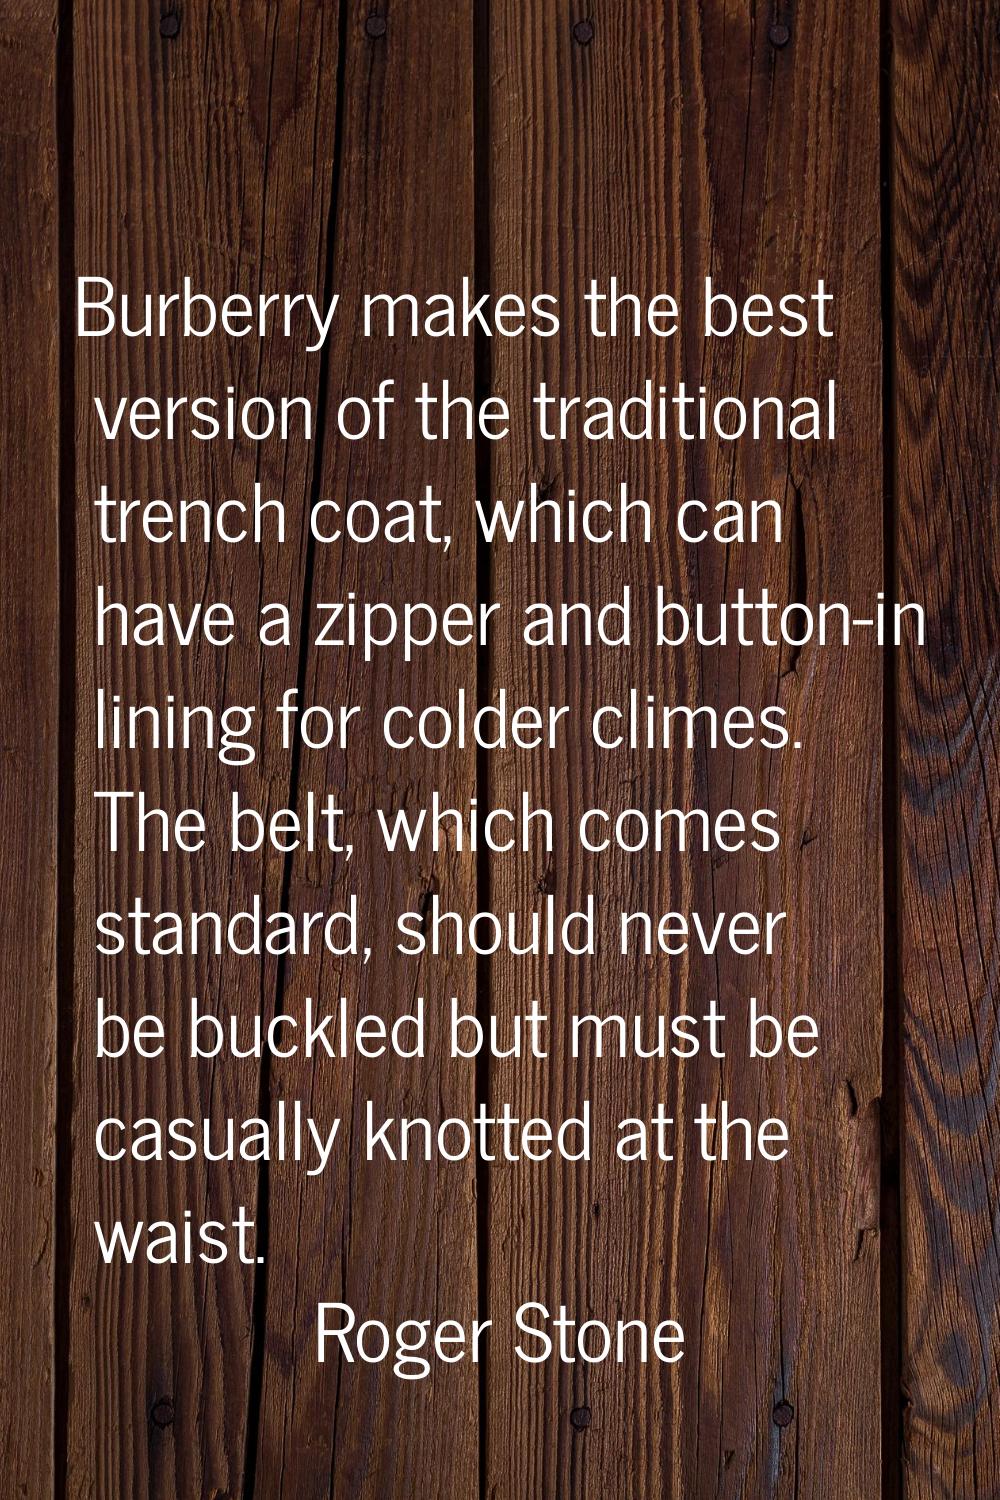 Burberry makes the best version of the traditional trench coat, which can have a zipper and button-